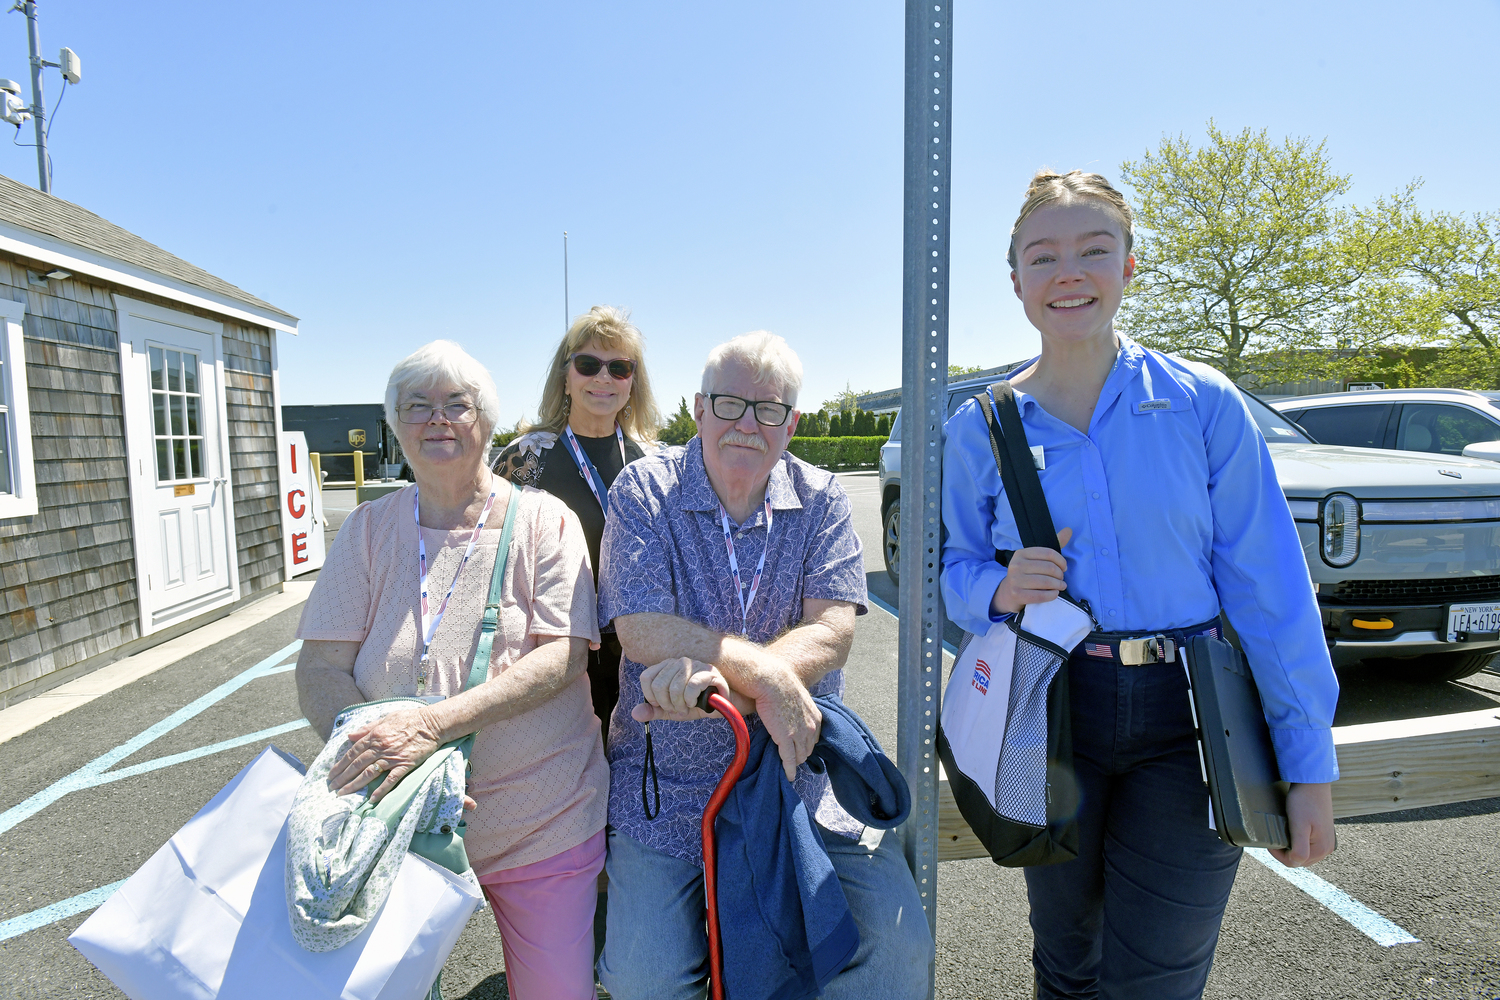 American Cruise Line passengers Joy Sweeney from Antelope, Ca, Kay Rensvold from Pattison TX and Ed Sweeney, also from antelope, with cruise and excursion director Karis Borchelt, wait for the launch back to their ship at the dock in Sag Harbor on Tuesday.  DANA SHAW